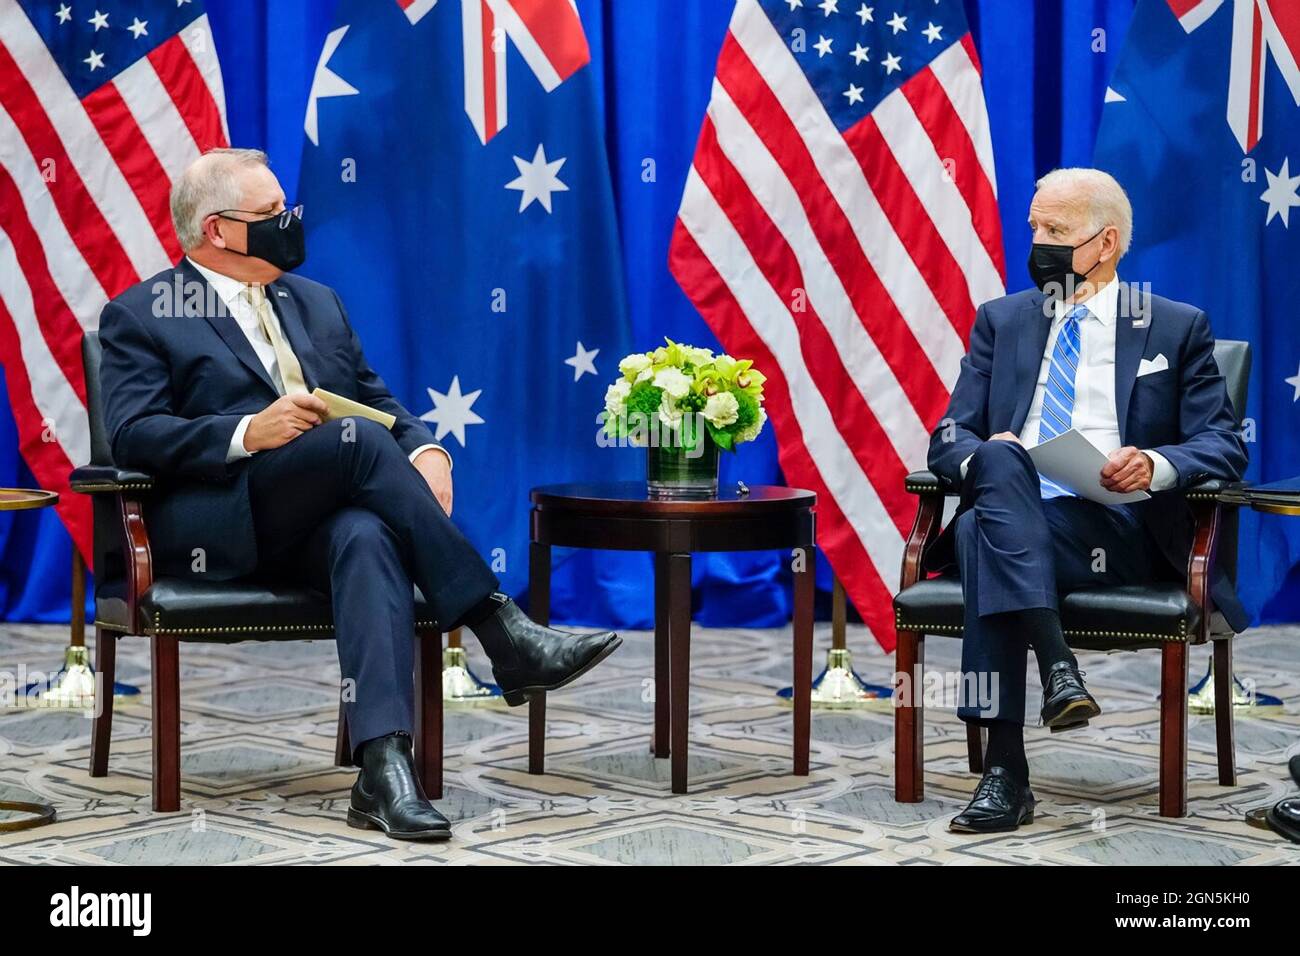 New York, United States of America. 21 September, 2021. U.S President Joe Biden, right, holds a bilateral meeting with Australian Prime Minister Scott Morrison on the sidelines of the United Nations General Assembly at the Intercontinental Barclay Hotel September 21, 2021 in New York City, New York. Credit: Adam Schultz/White House Photo/Alamy Live News Stock Photo